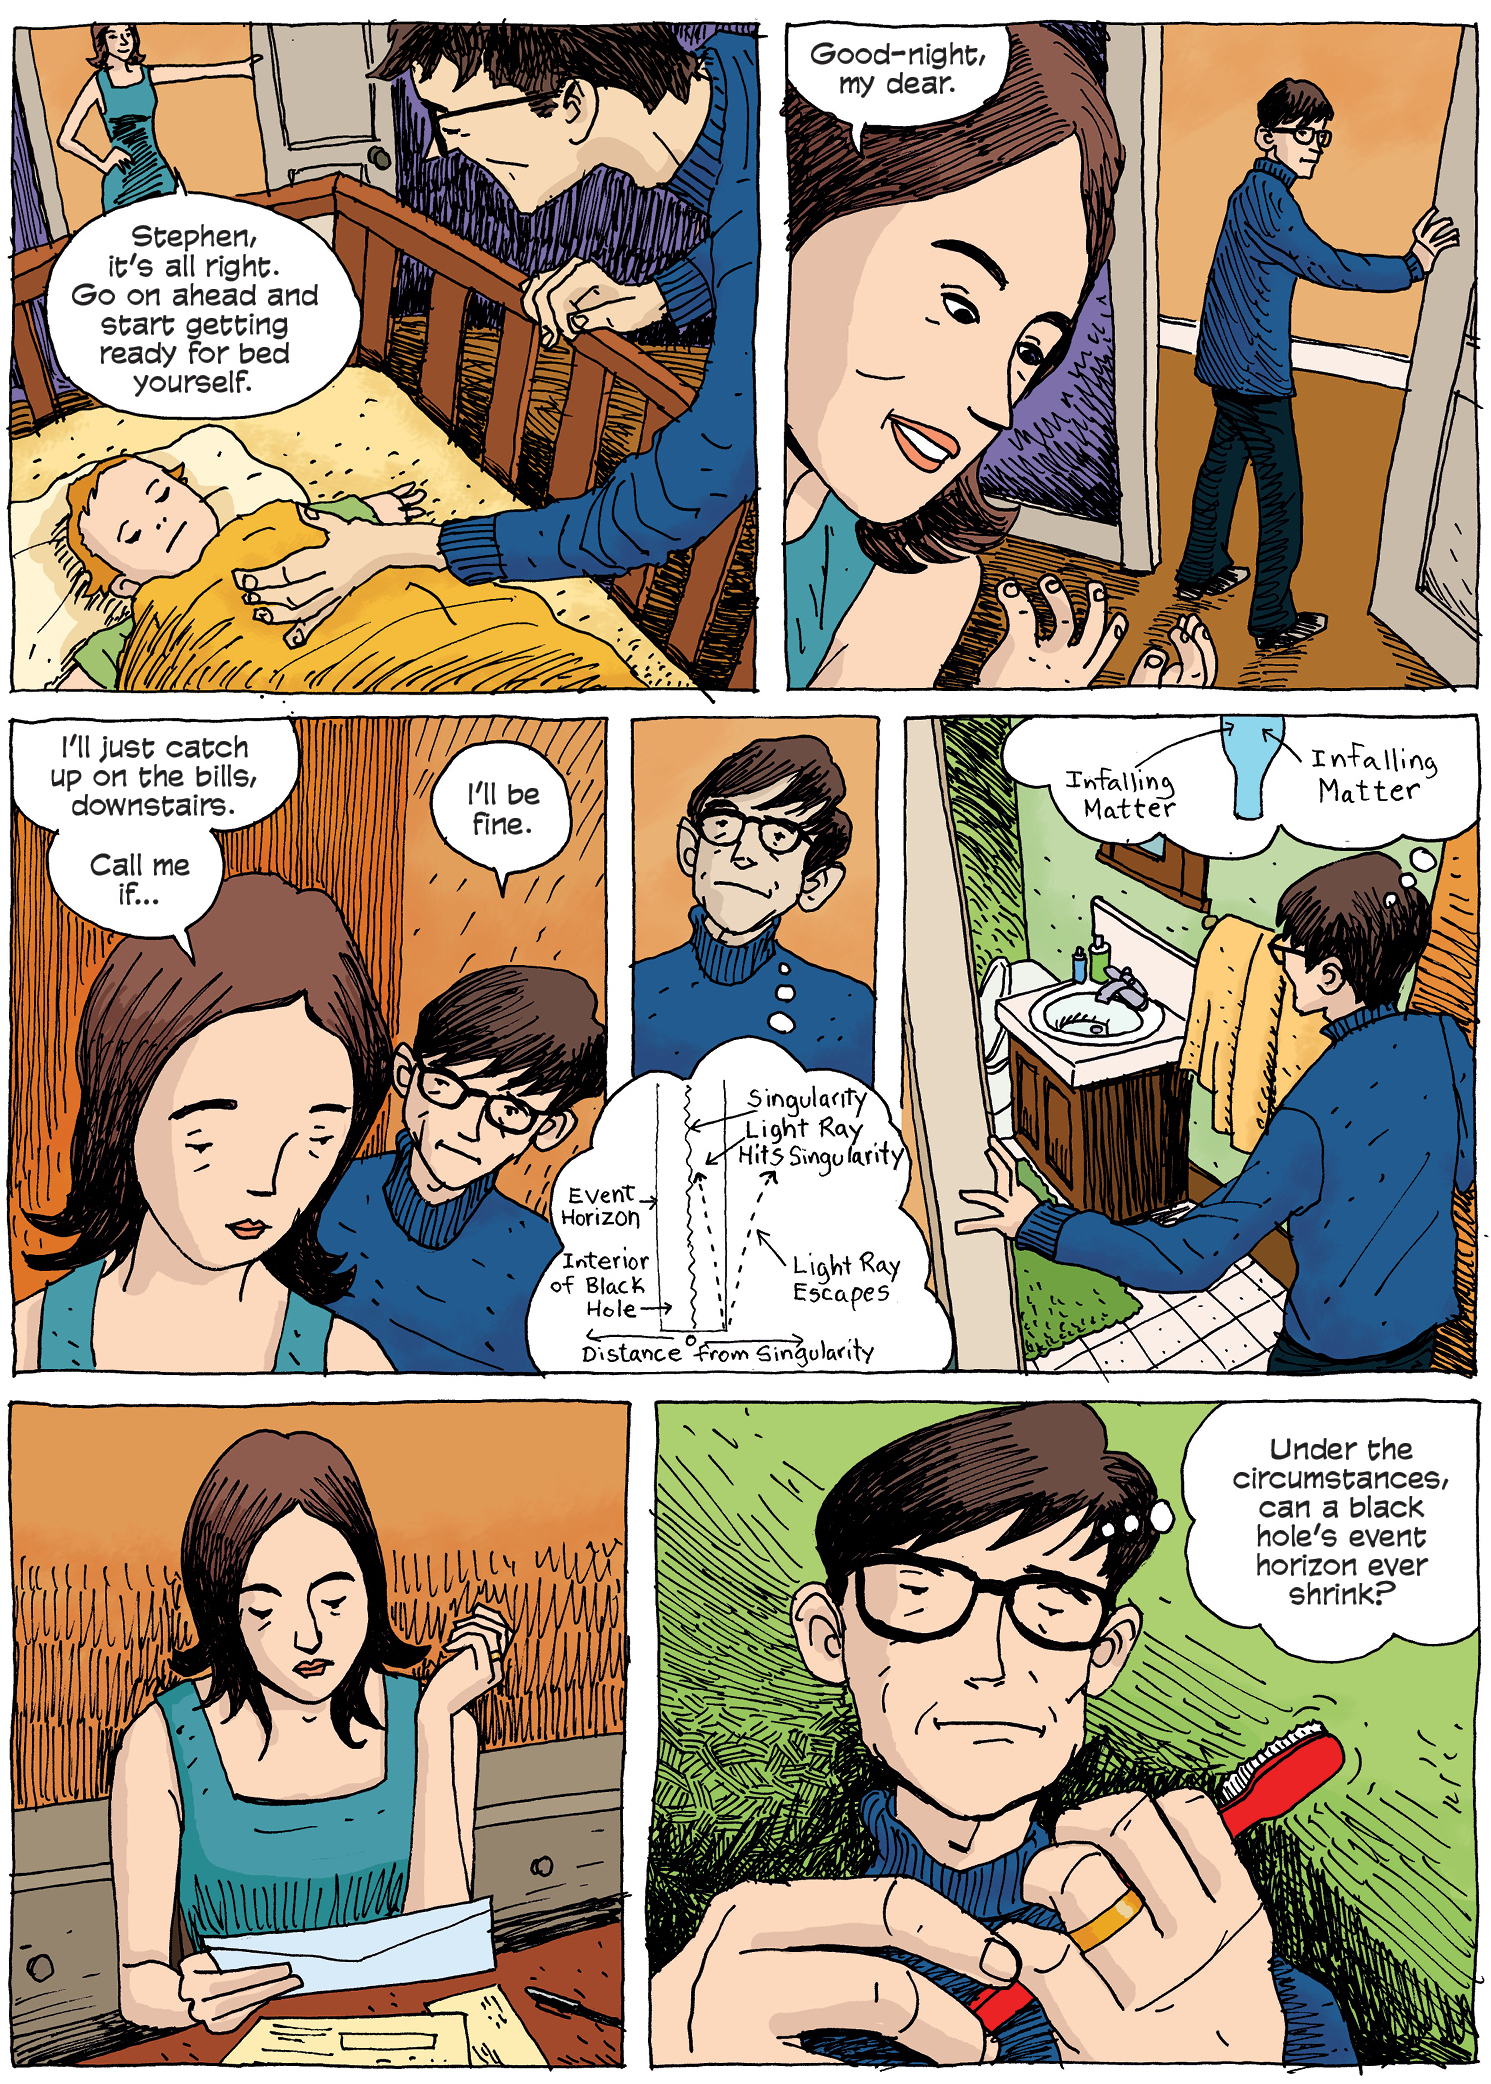 Stephen Hawking’s Graphic Novel Biography Shows How He Saw The World, And The Universe